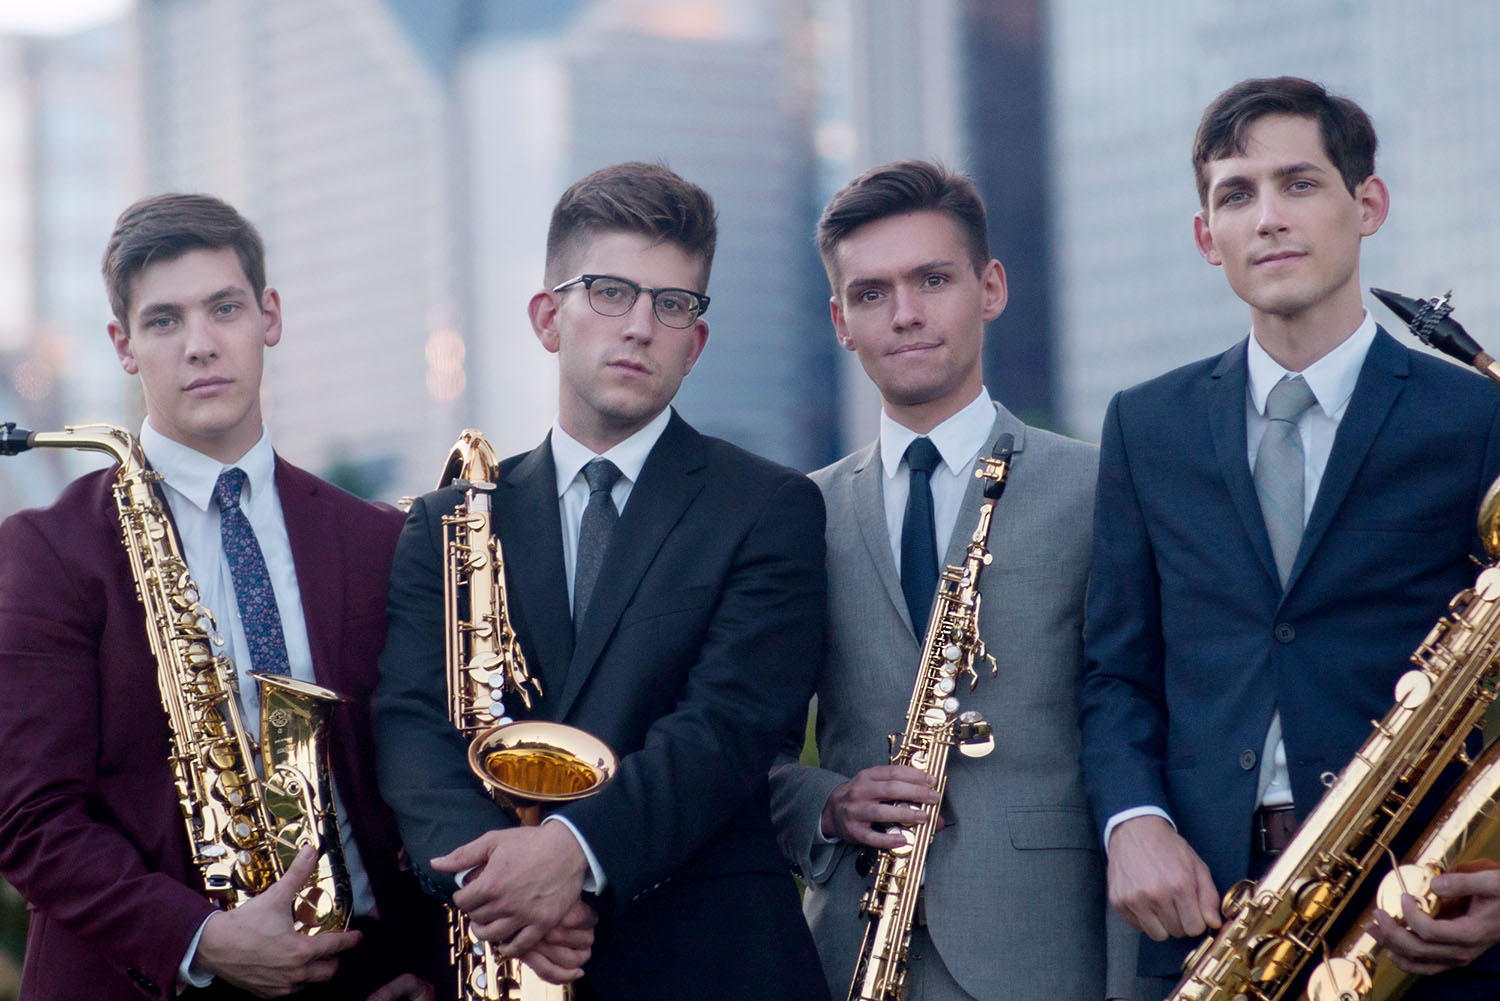 ~Nois, a Chicago-based saxophone quartet, is performing 7:30 p.m. March 14 as part of the UNK New Music Festival. The festival features four concerts in UNK’s Fine Arts Recital Hall, all of which are free and open to the public. (Courtesy photo)